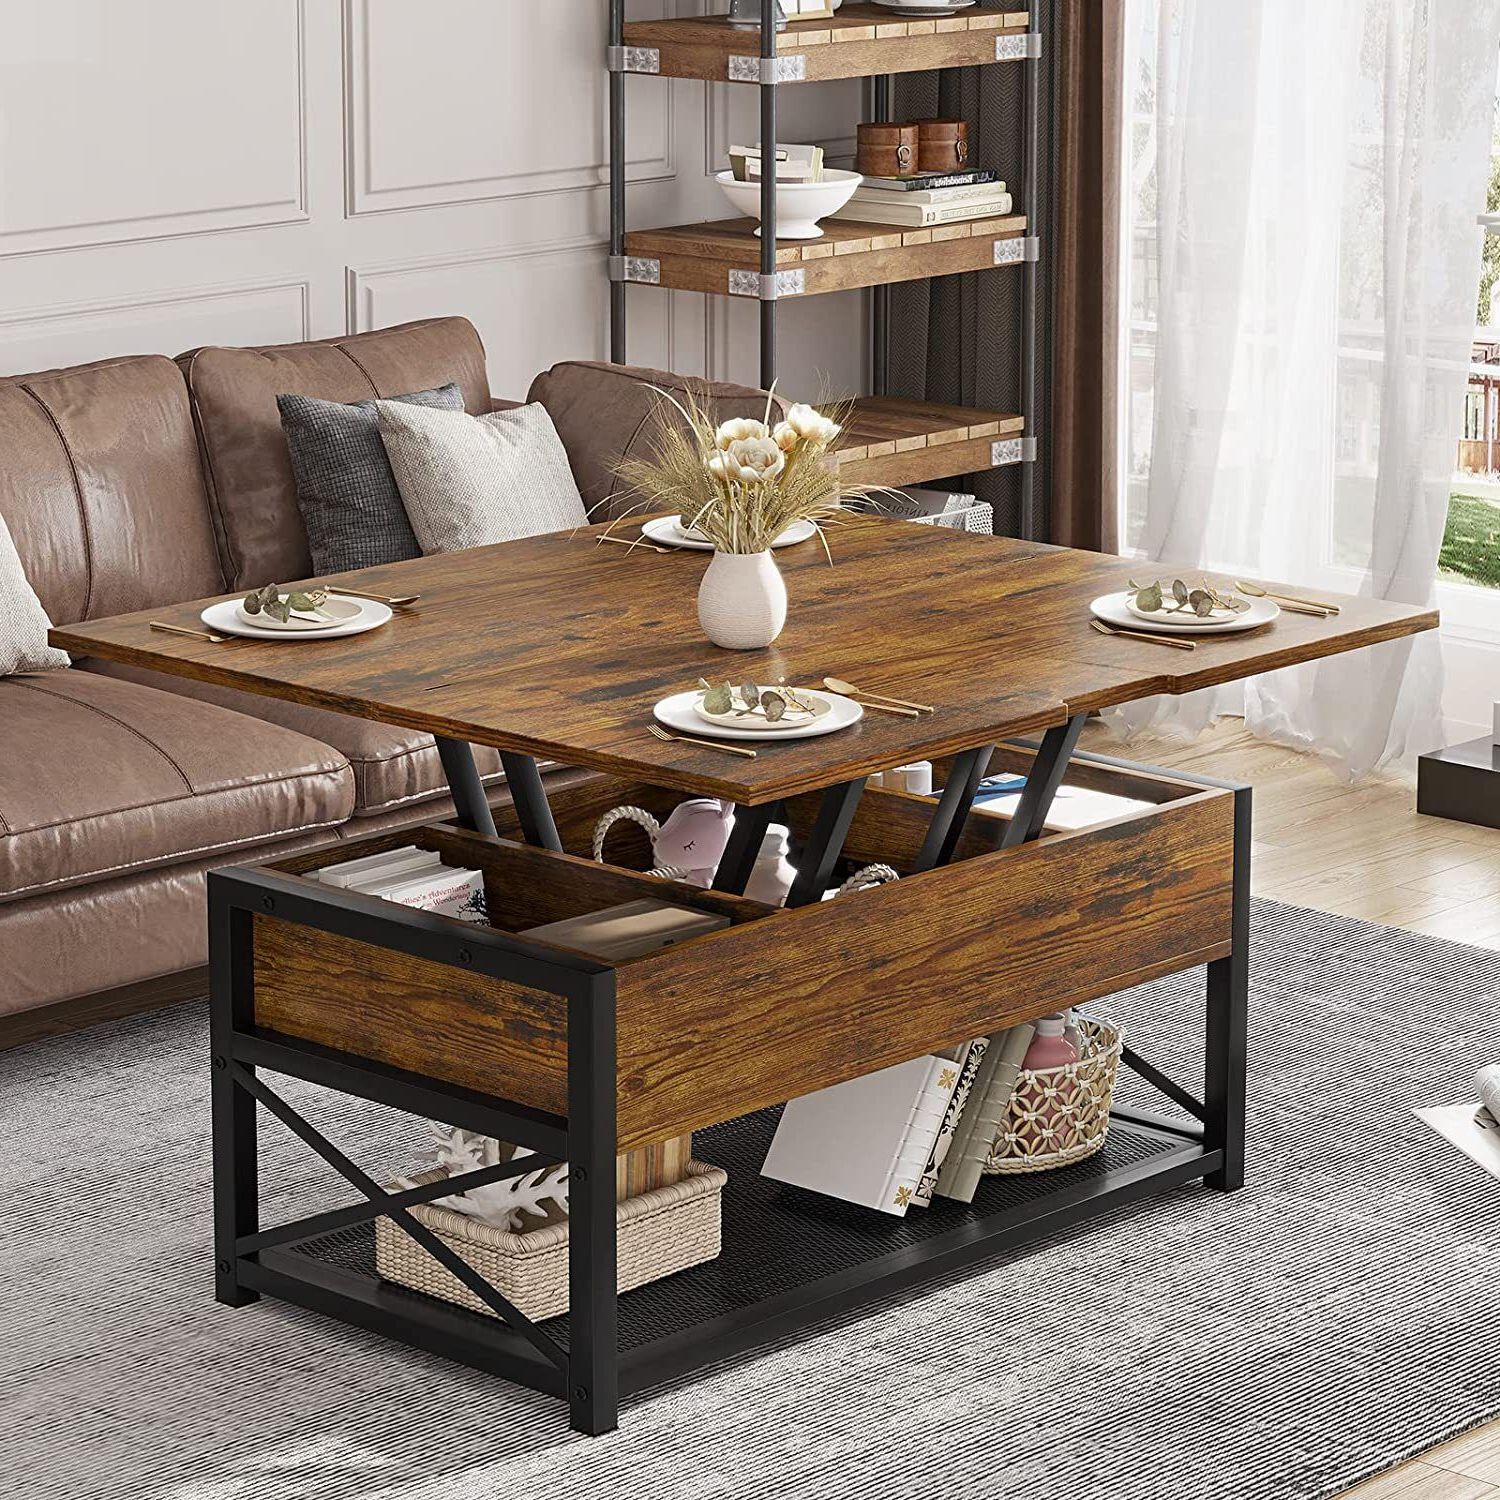 Ebay Within Most Popular Lift Top Coffee Tables (View 13 of 26)